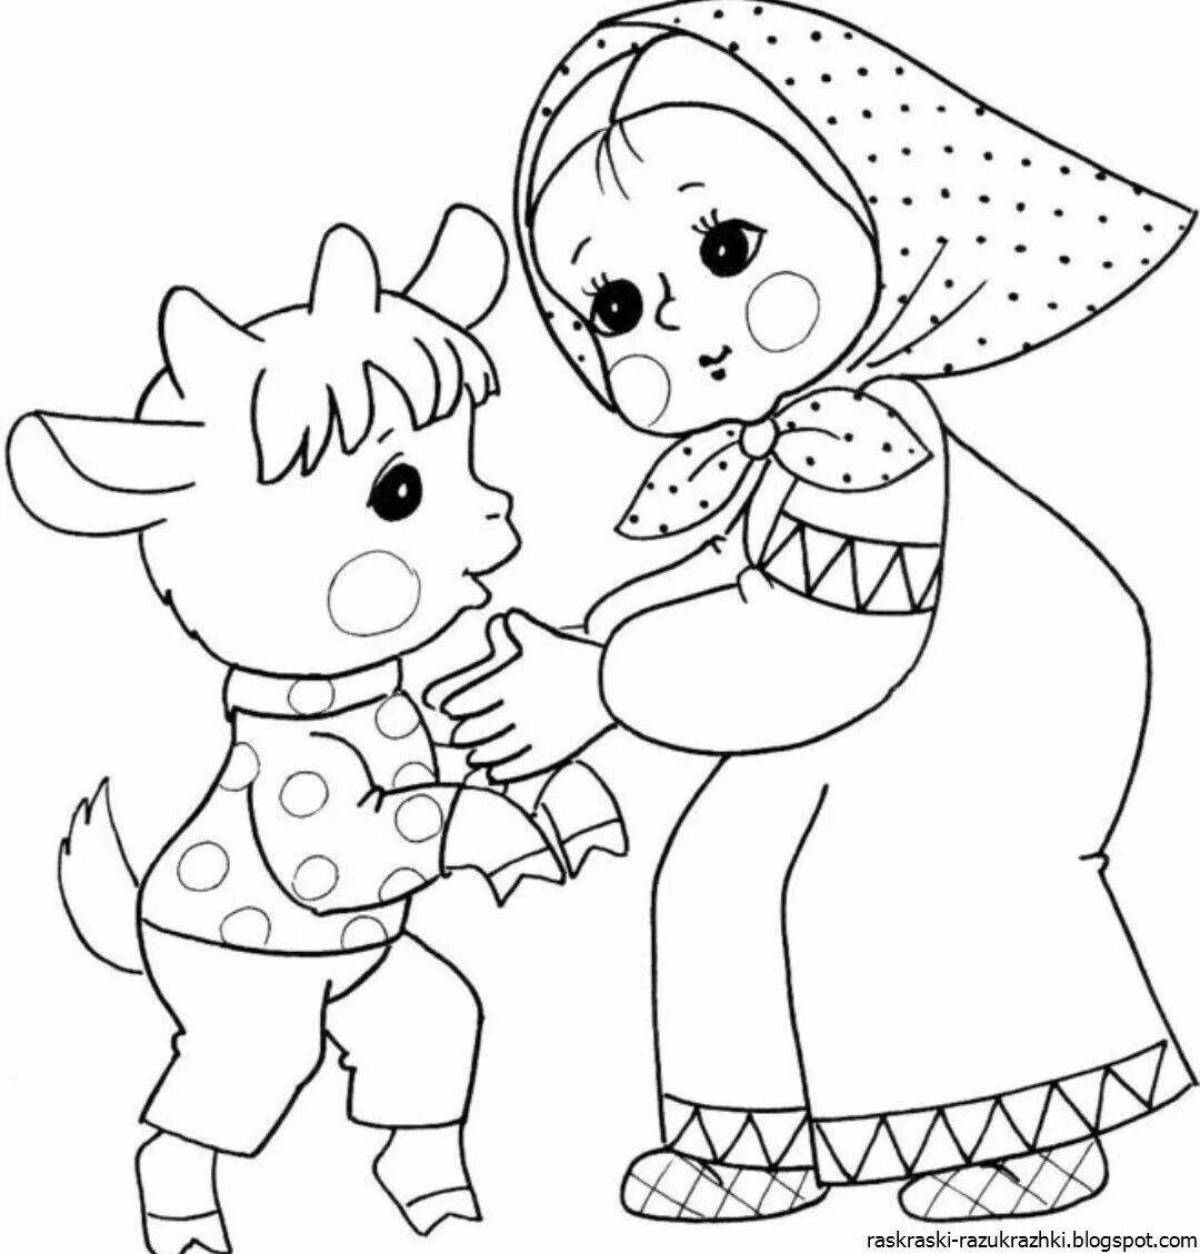 Playful fairy tale coloring book for kids